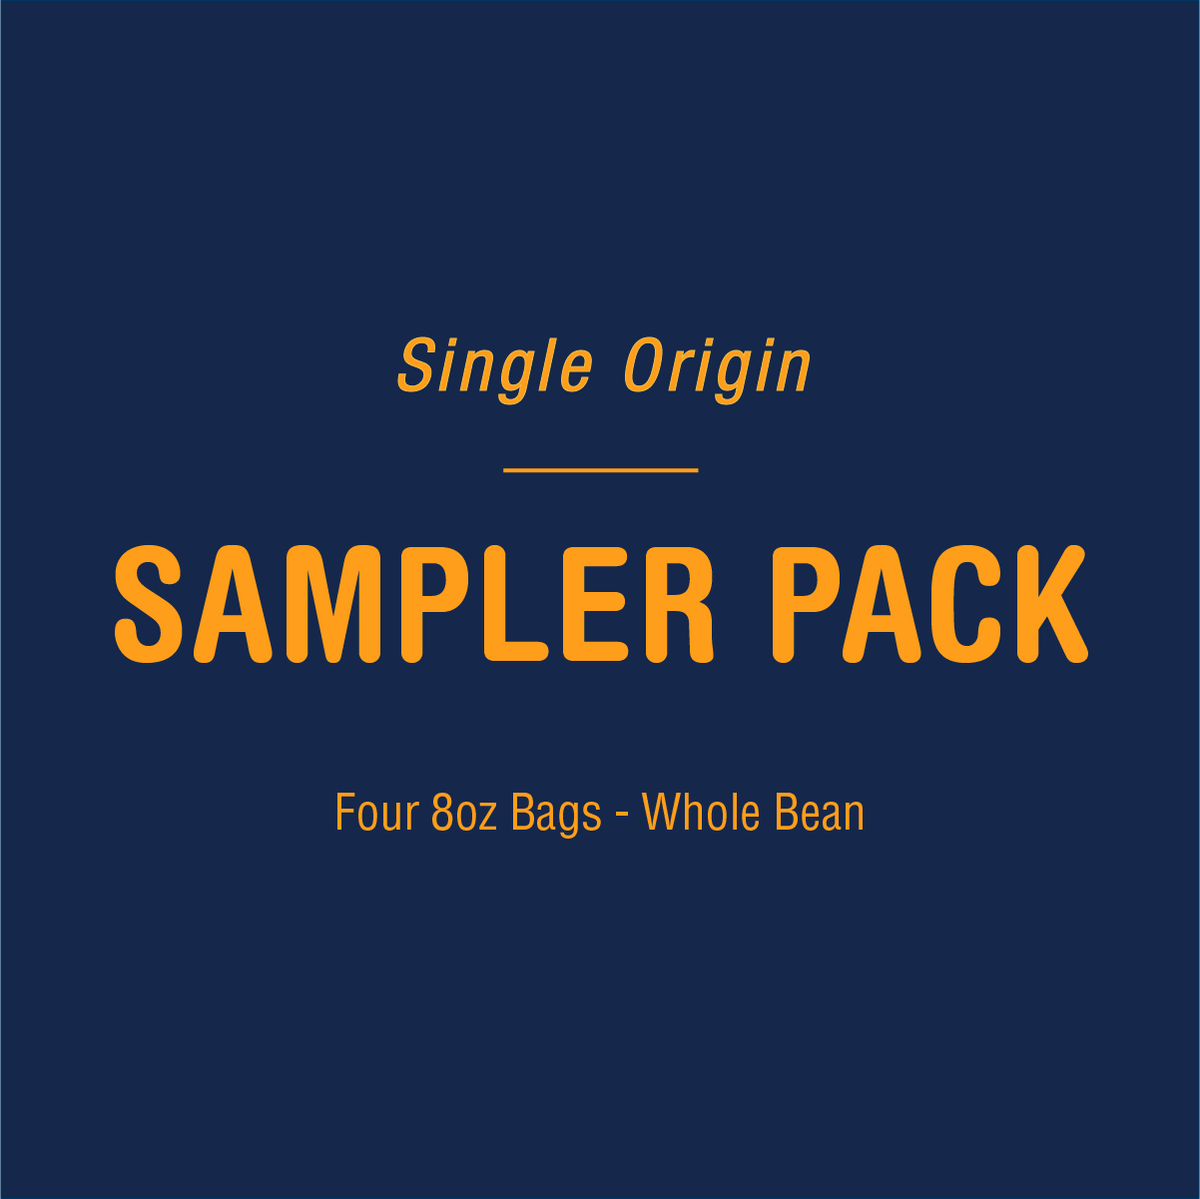 Image showing text on a navy blue background that reads "Tandem Coffee Roasters Single Origin Sampler Pack, four 8oz bags - whole bean" in white and orange letters.